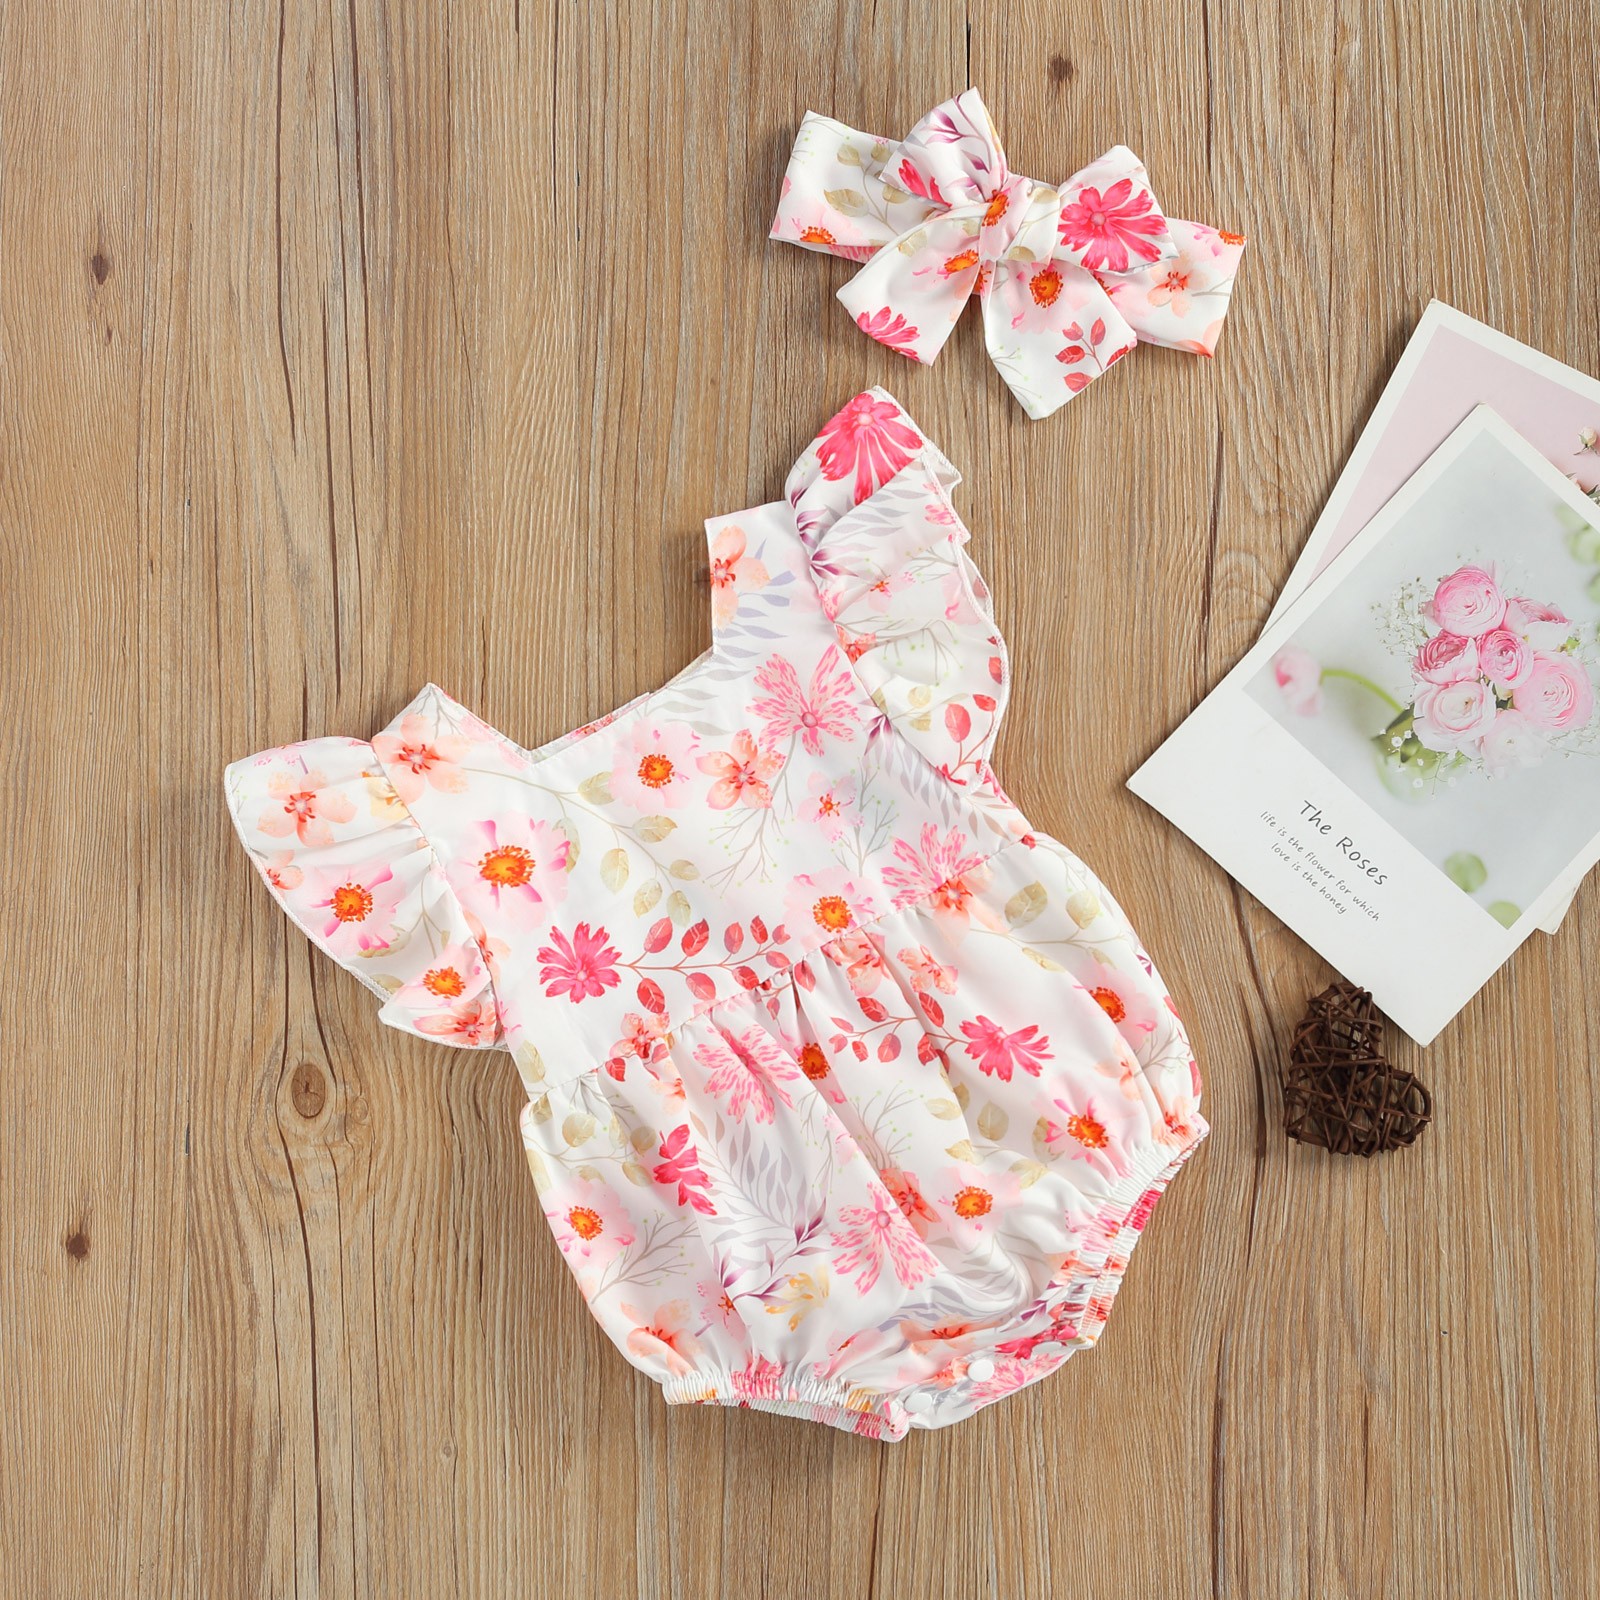 Ma&Baby 0-12M Summer Flower Newborn Infant Baby Girl Ruffles Romper Sleeveless Jumpsuit Sunsuit Toddler Girl Clothes Costumes